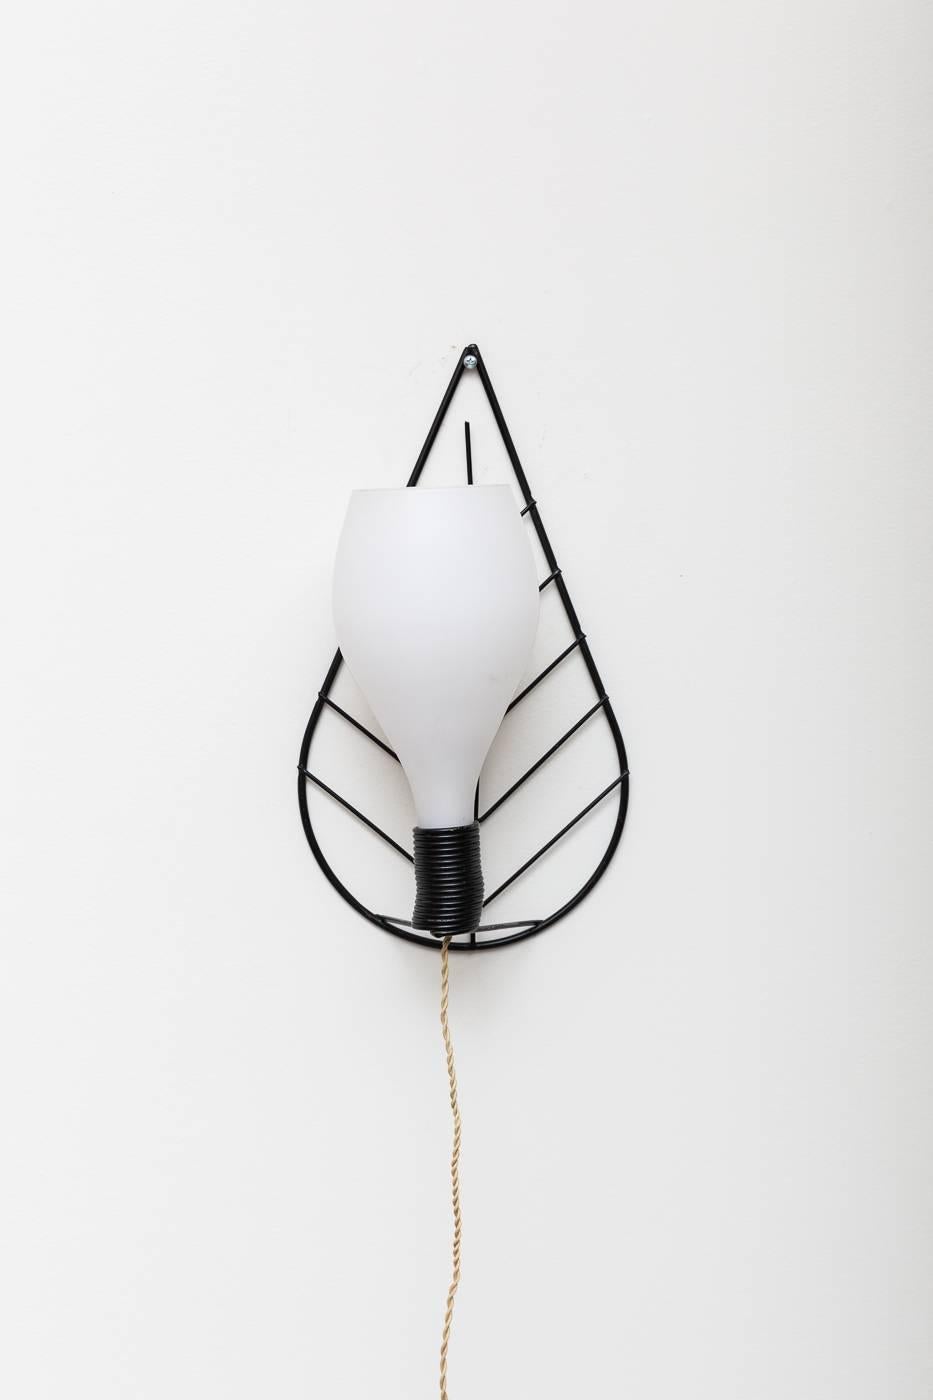 Black enameled metal wire leaf-shaped wall mount frame with bulbous satin milk glass shade. In original condition with original hardware and twisted wire, new plug.